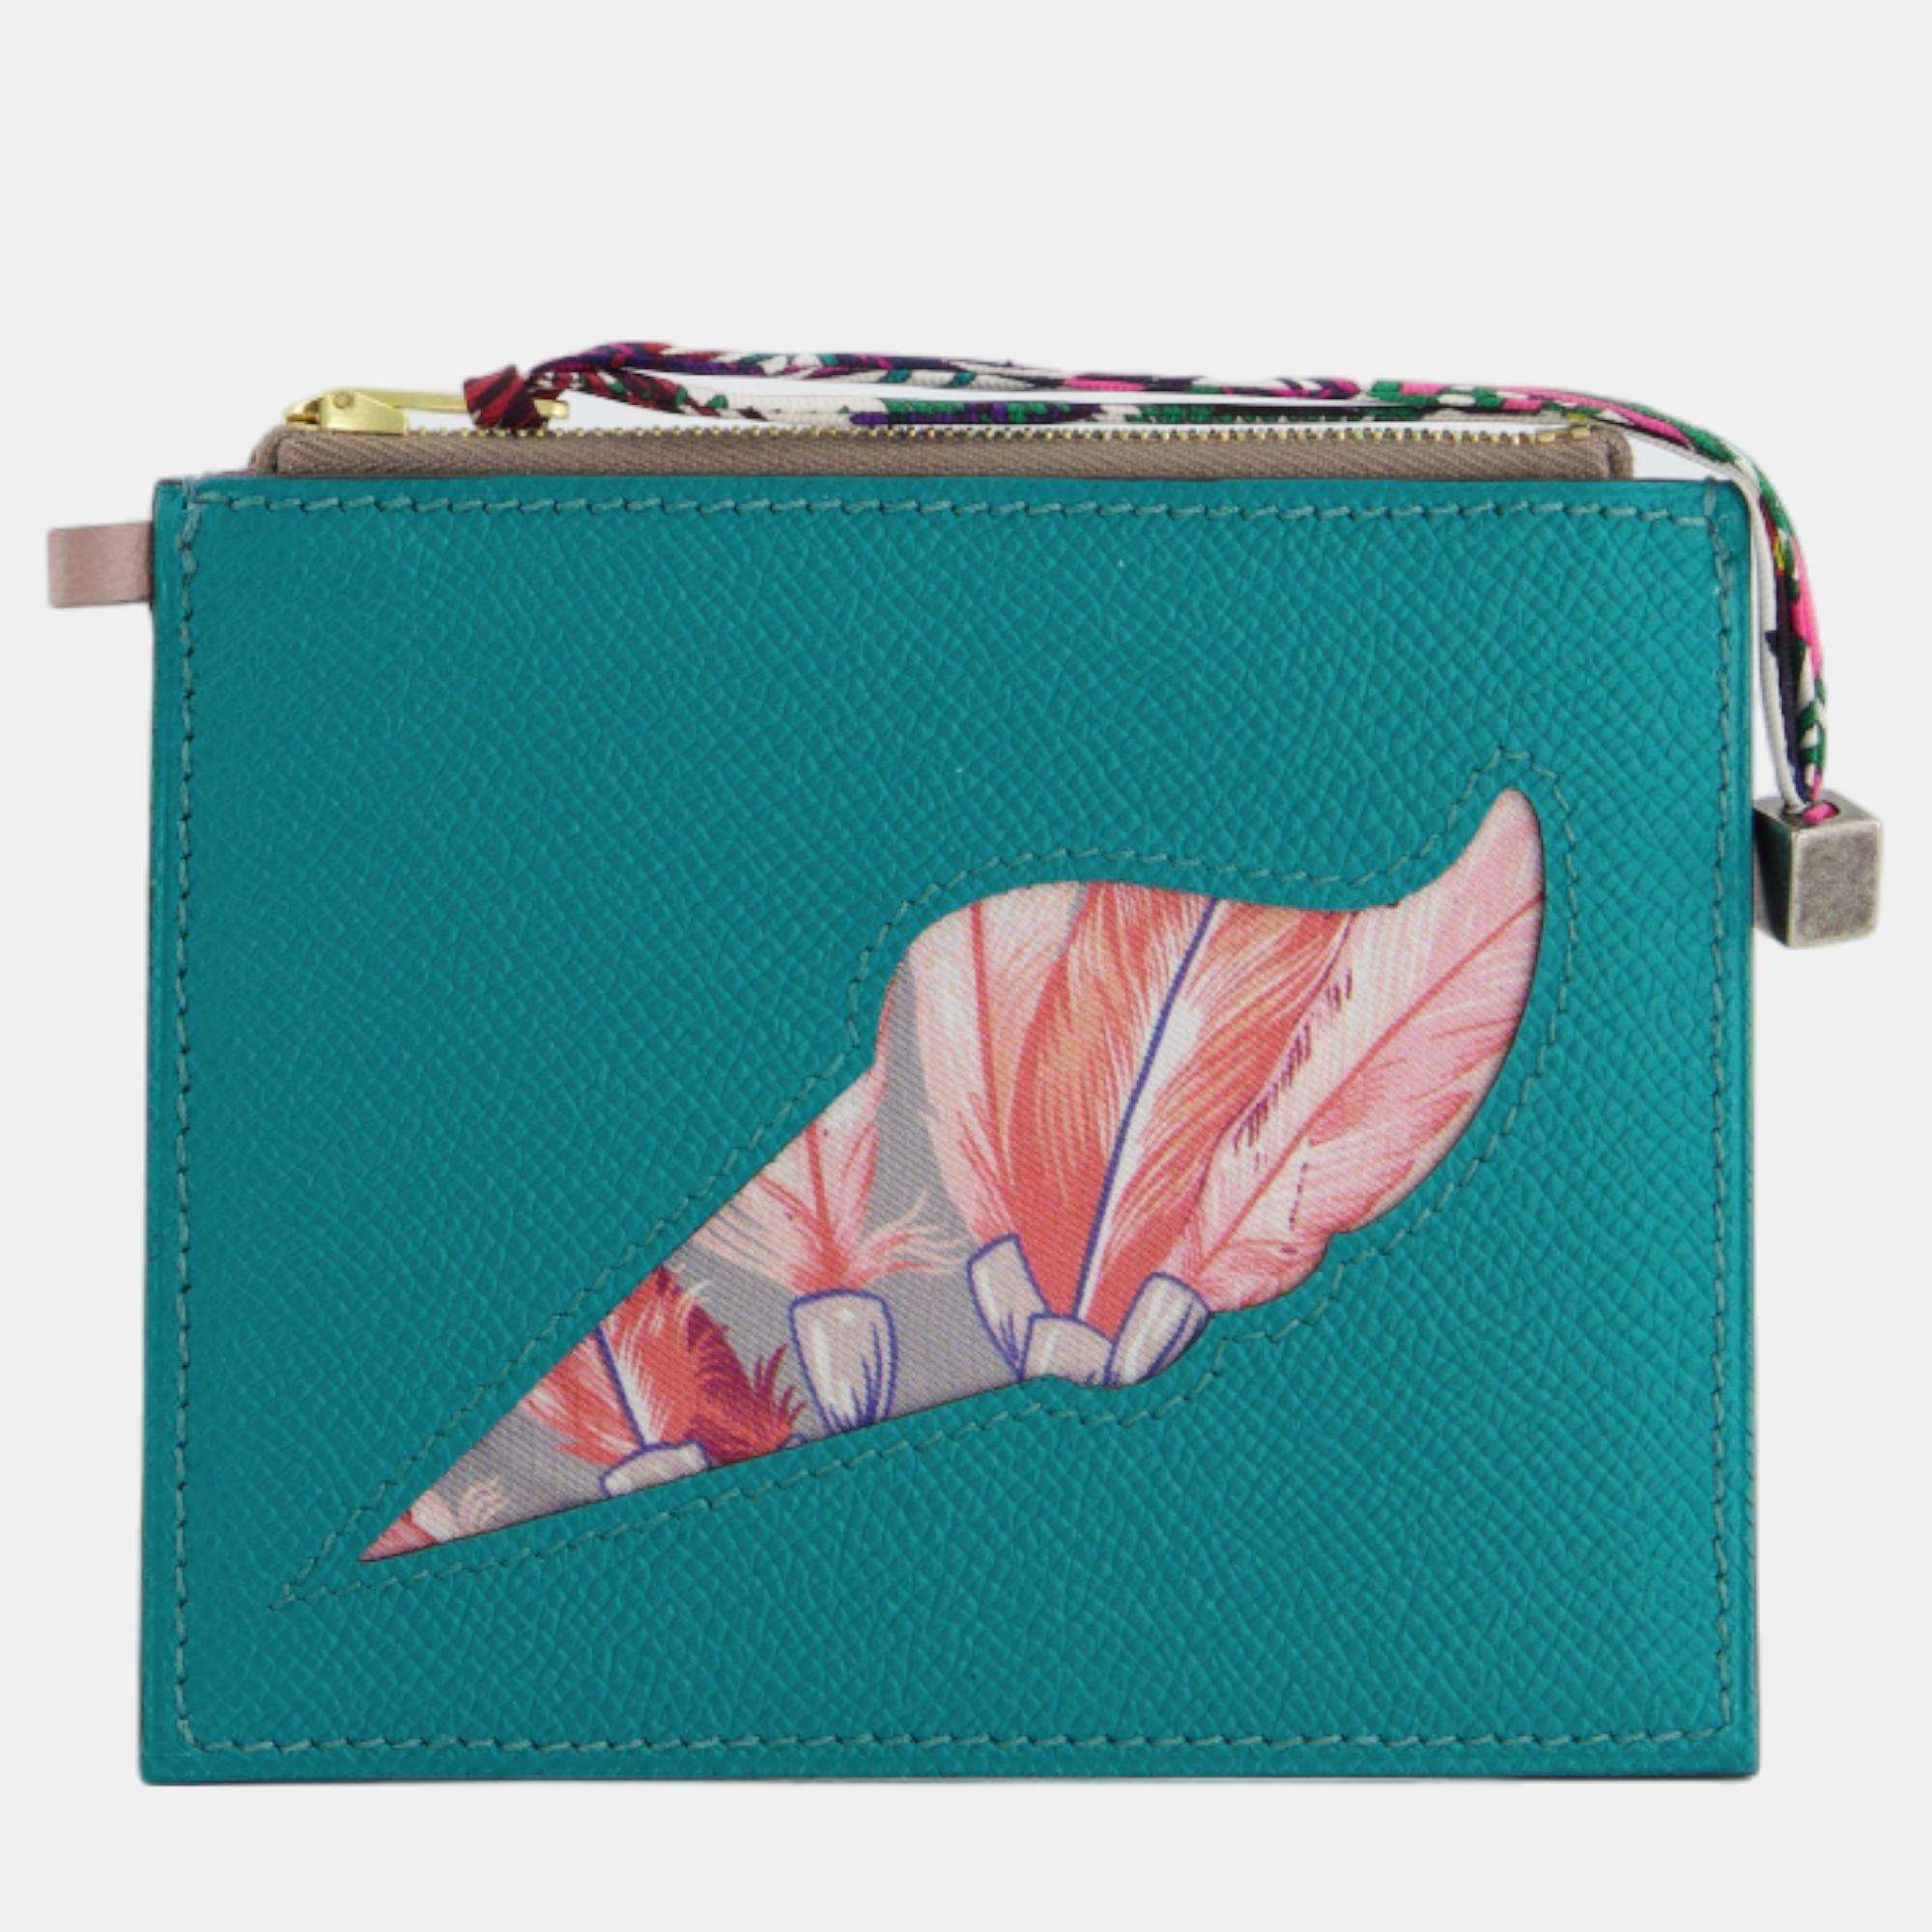 Hermes petit h coin purse in cactus and cognac epsom and togo leather with printed silk detail